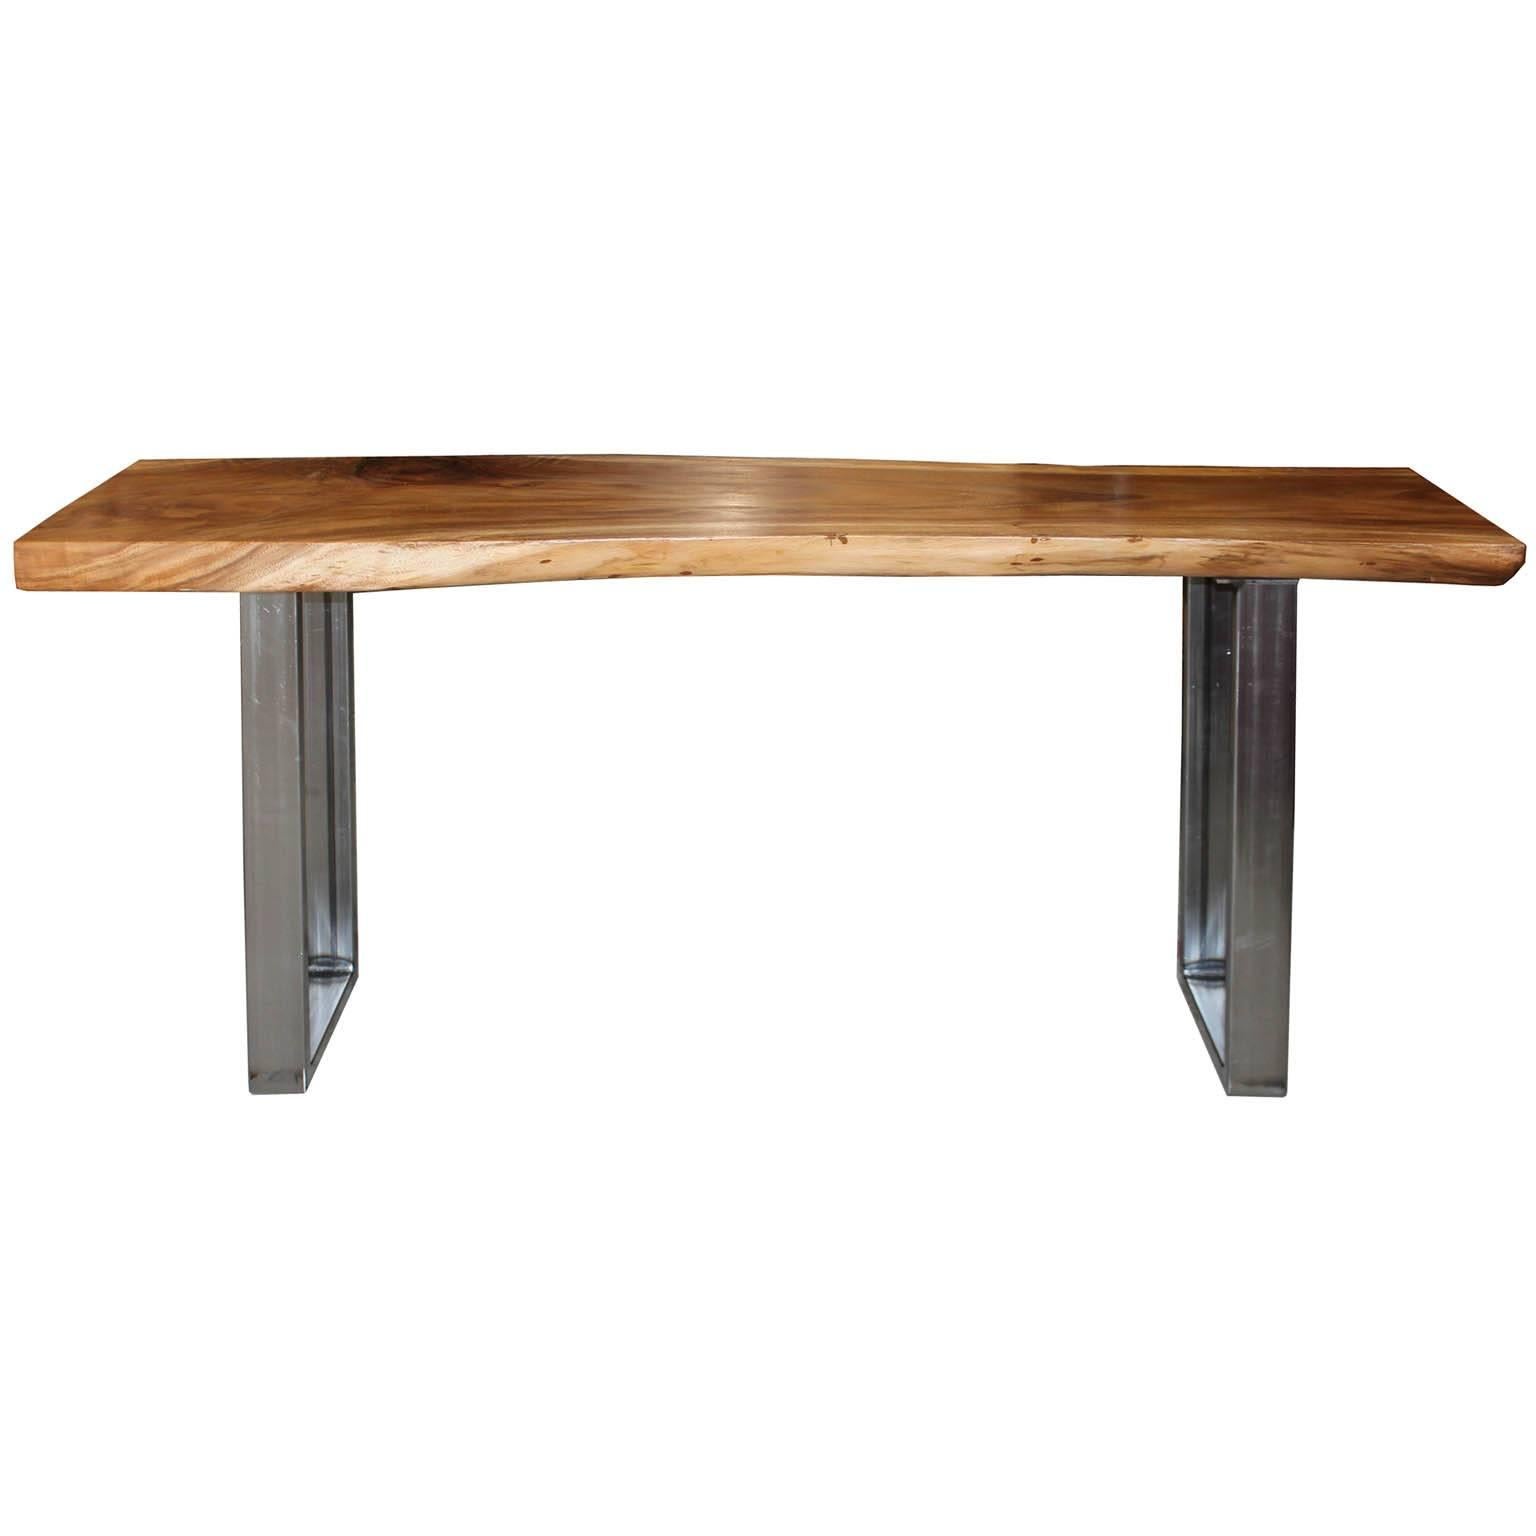 Live edge acacia wood console table on metal legs. This piece was made in Indonesia.